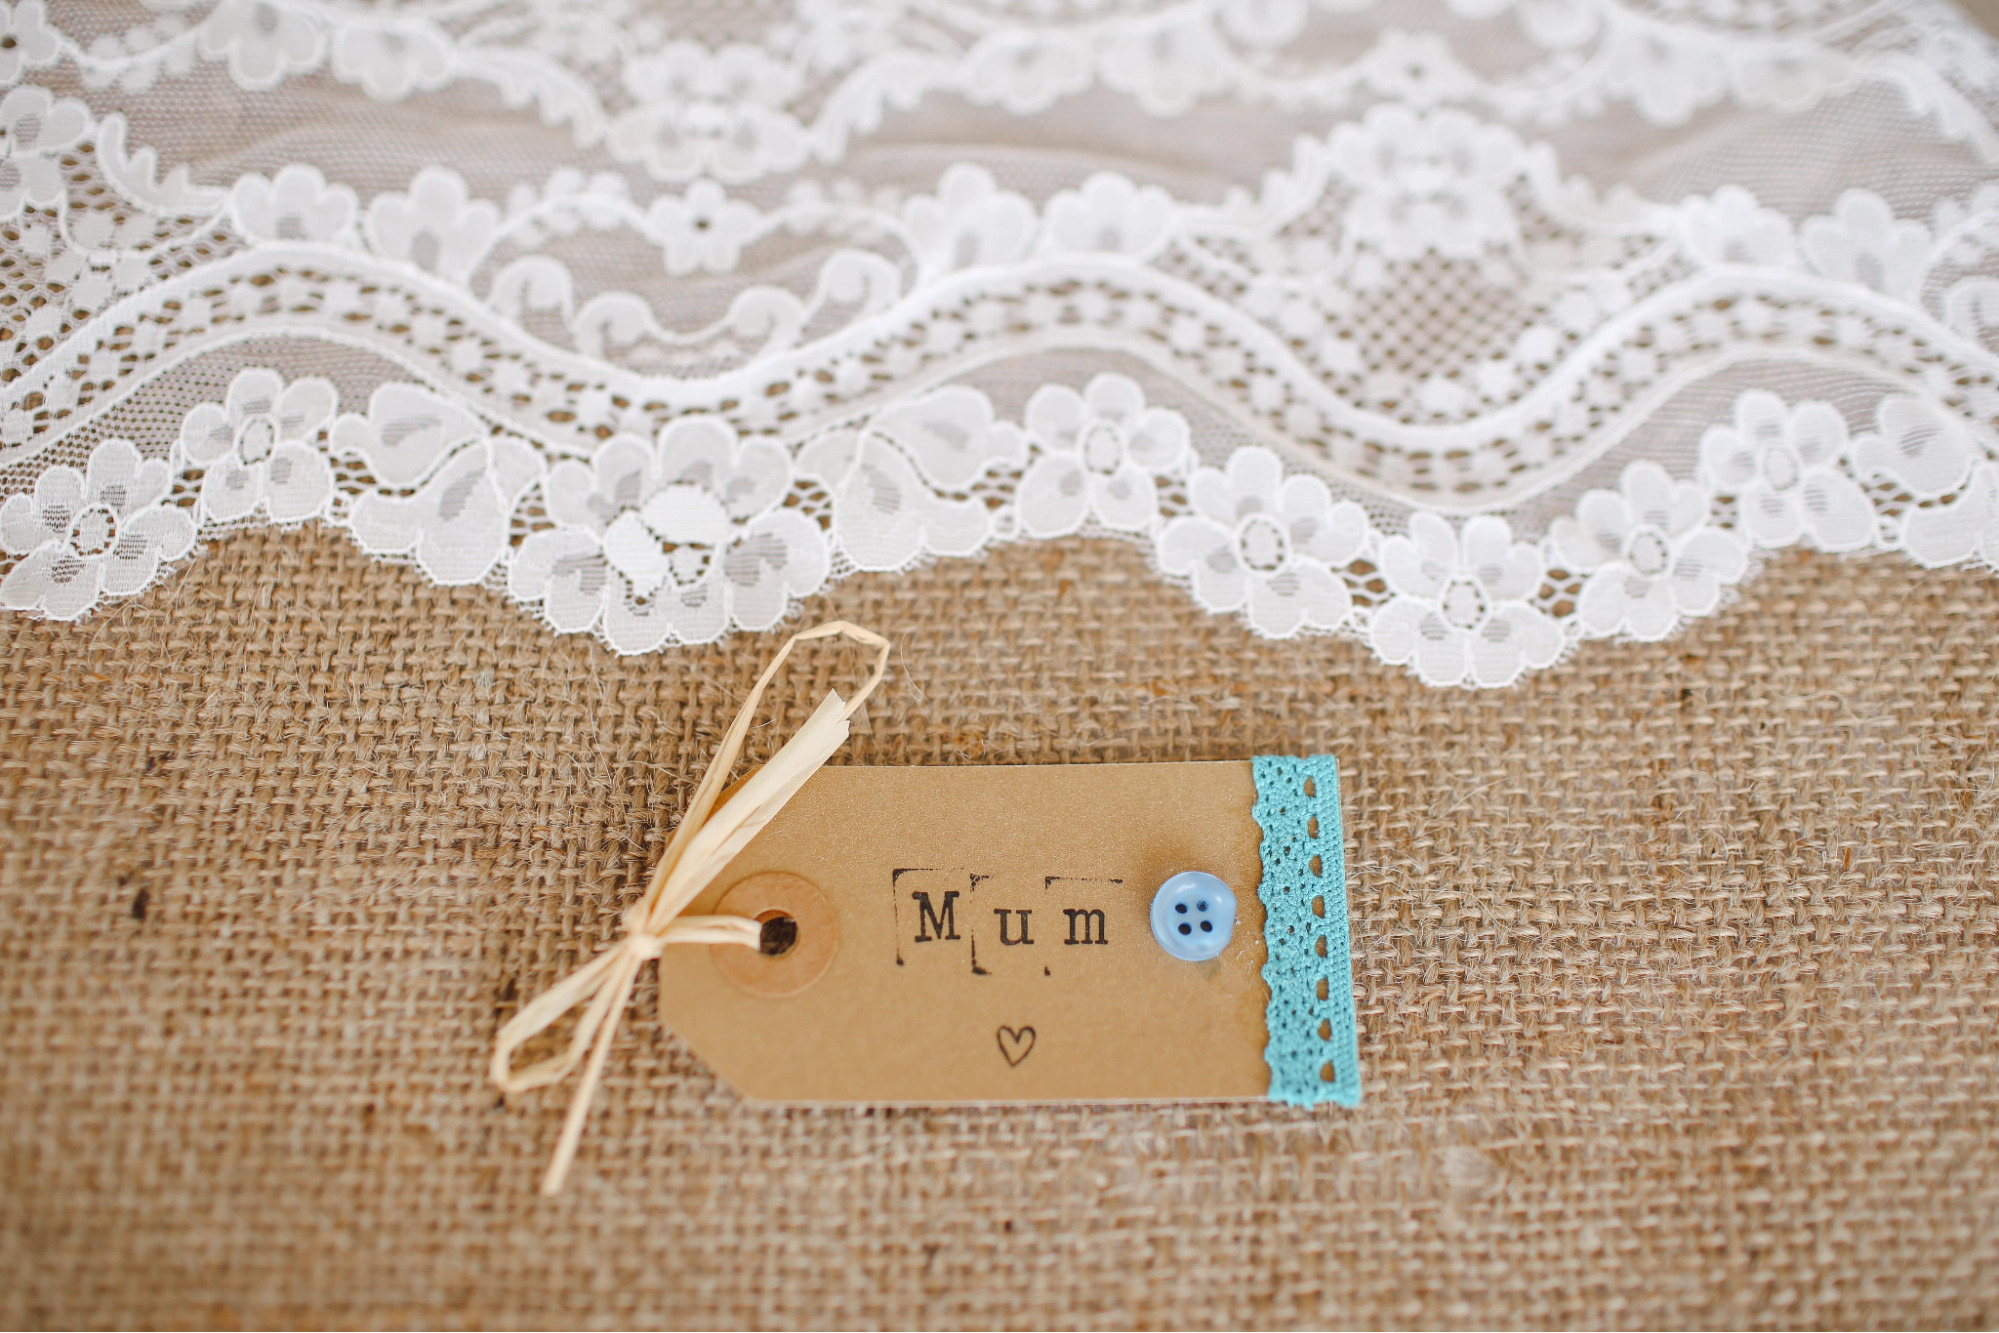 A handmade gift tag for a Mother’s Day present is on a burlap and lace table runner